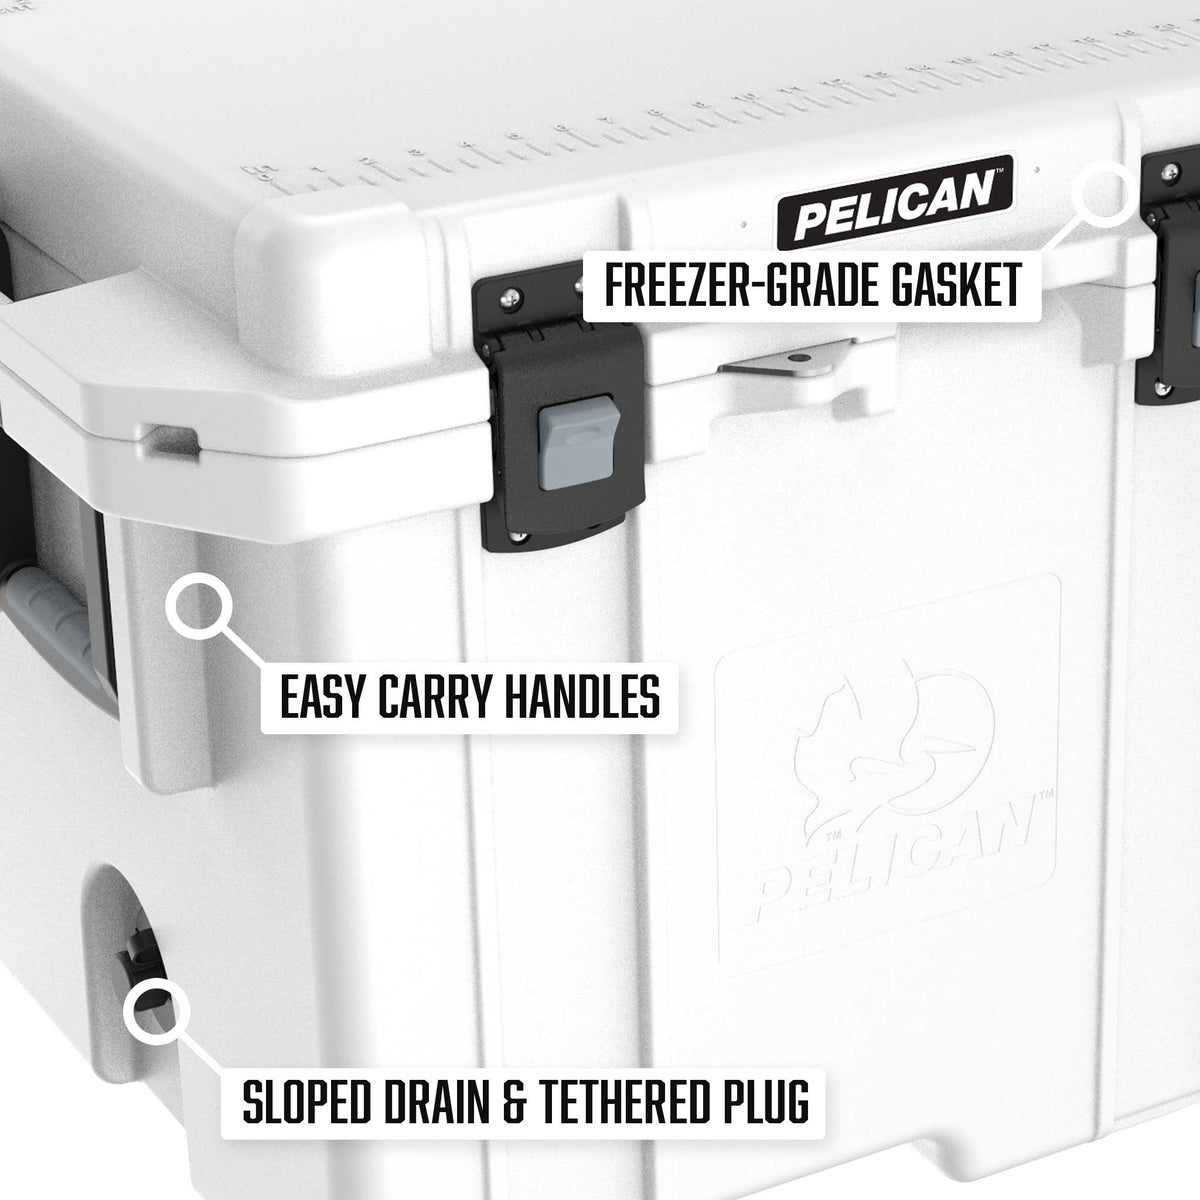 150QT-1-WHT Pelican™ 150QT Elite Cooler comes with two sets of easy to use handles, sloped drain &amp; tethered plug, and a freezer grade gasket